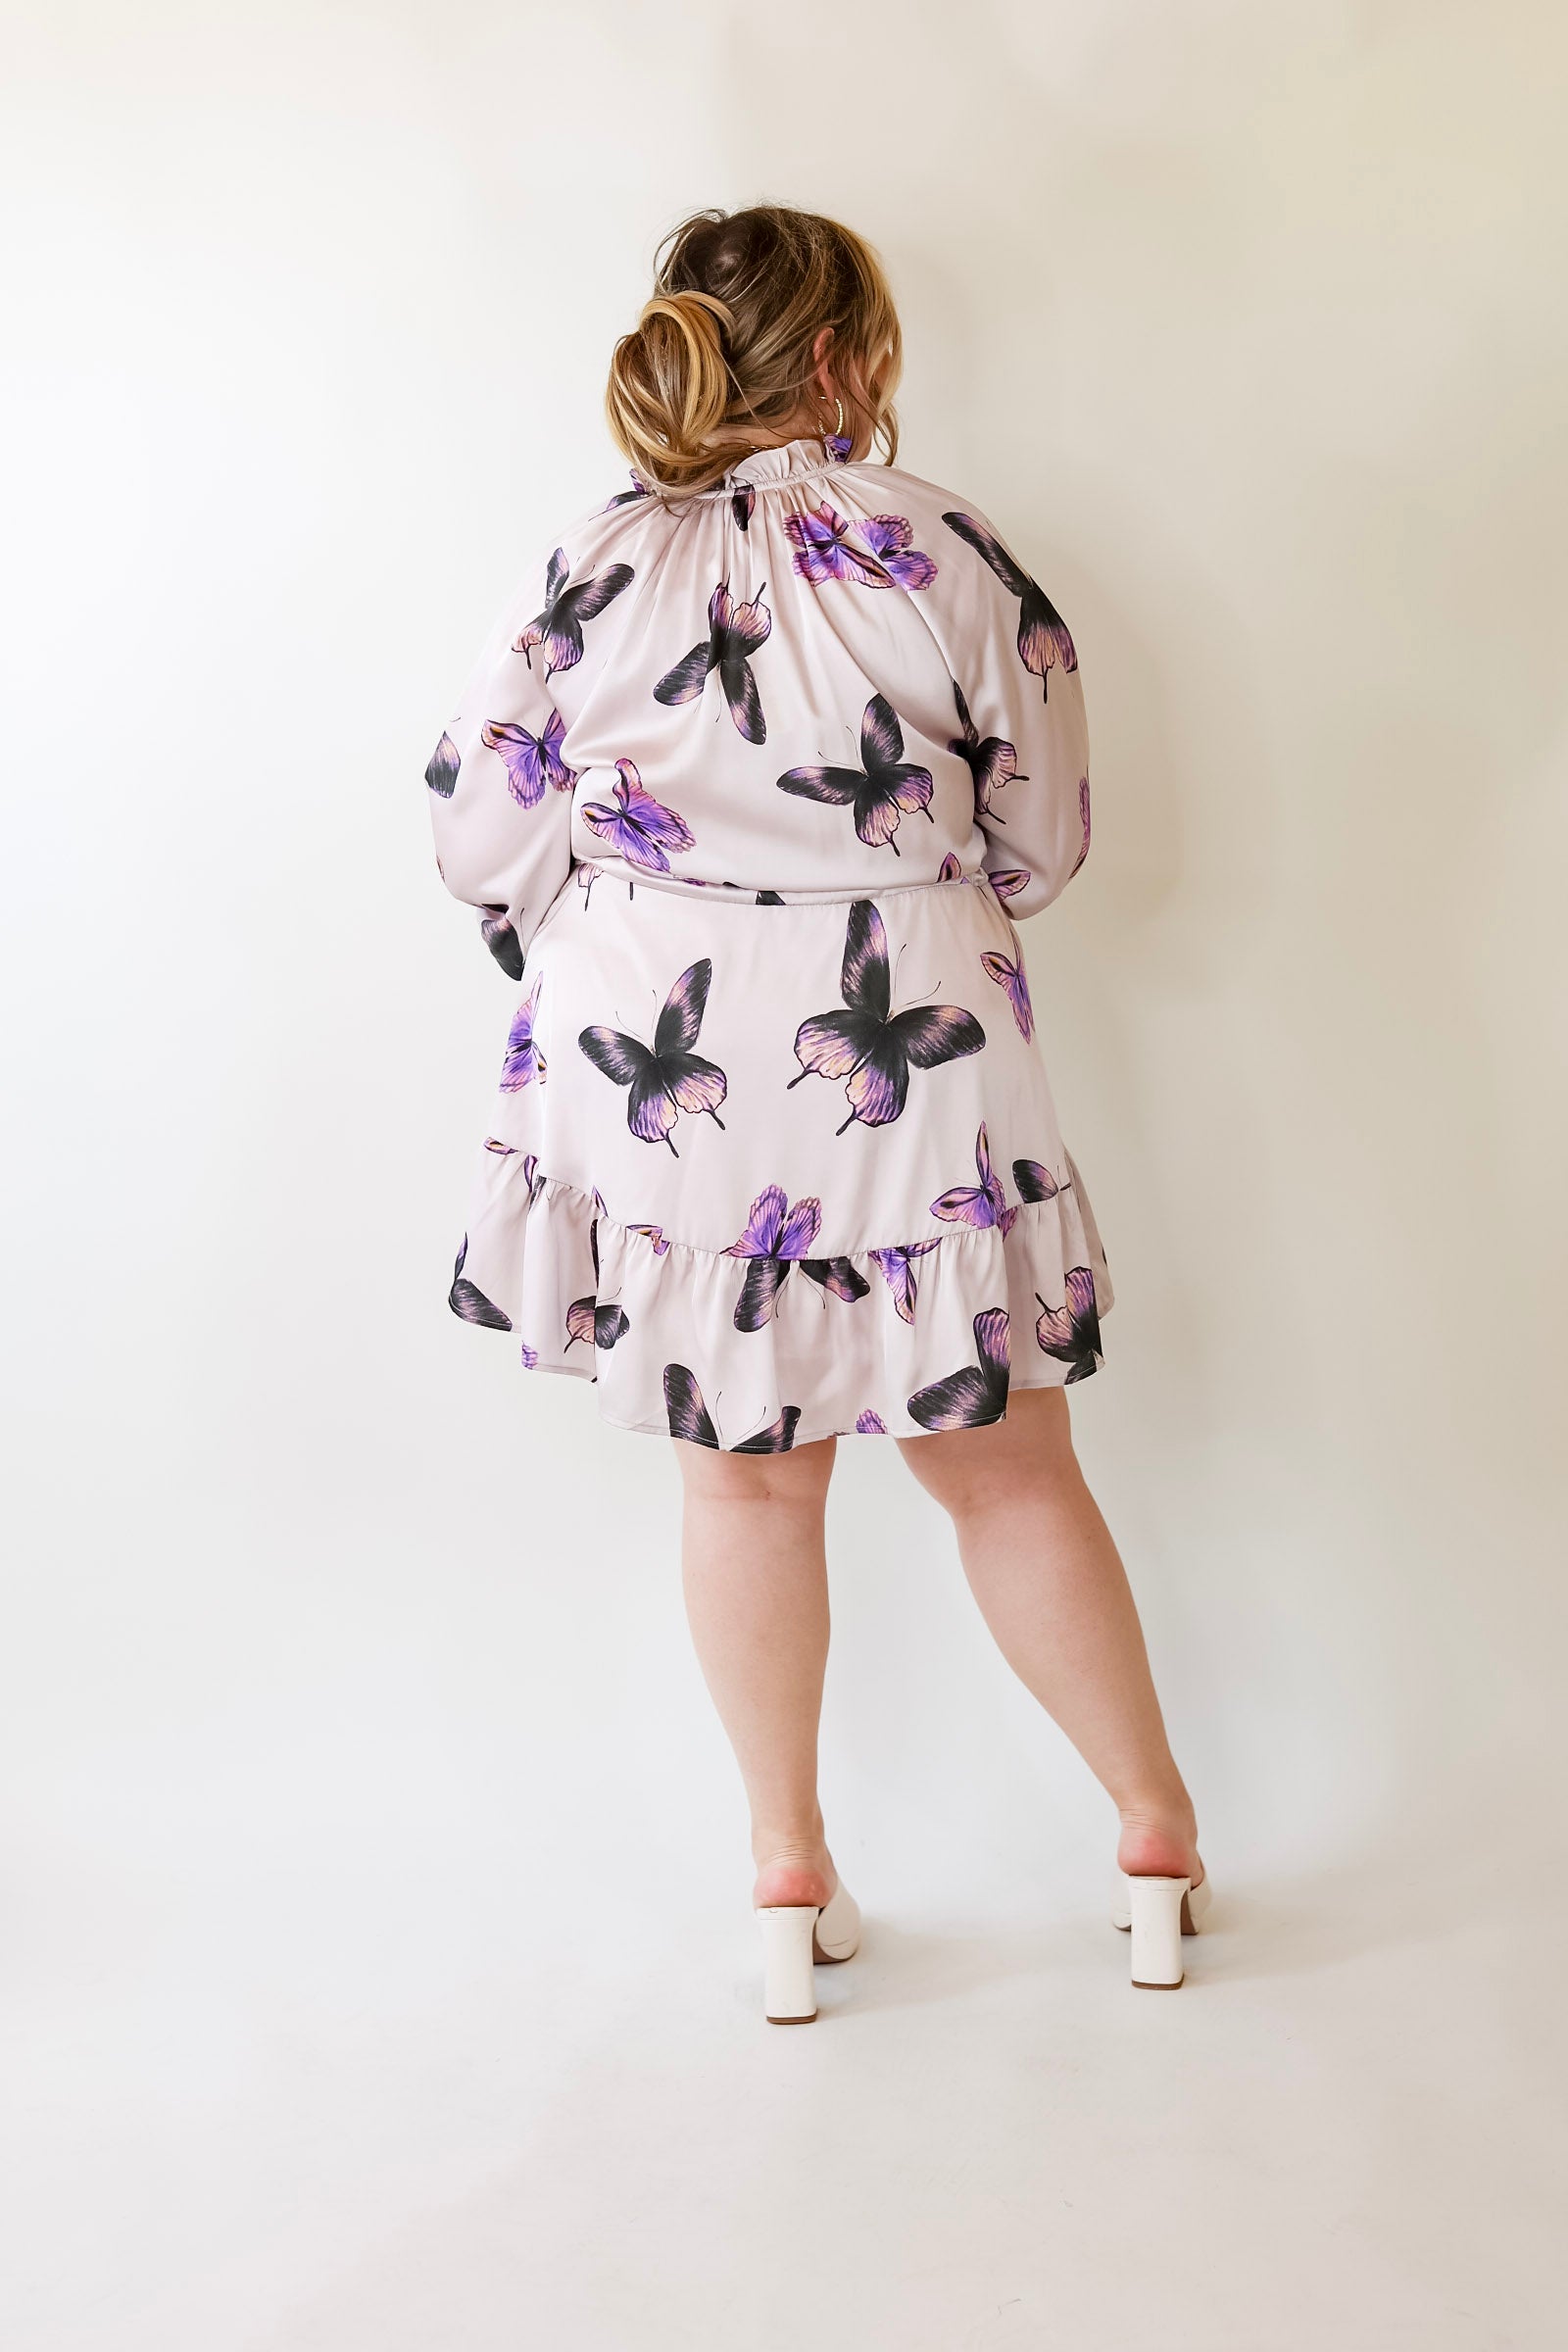 Butterfly Fly Away Half Button Dress with Butterfly Print in Muted Purple - Giddy Up Glamour Boutique